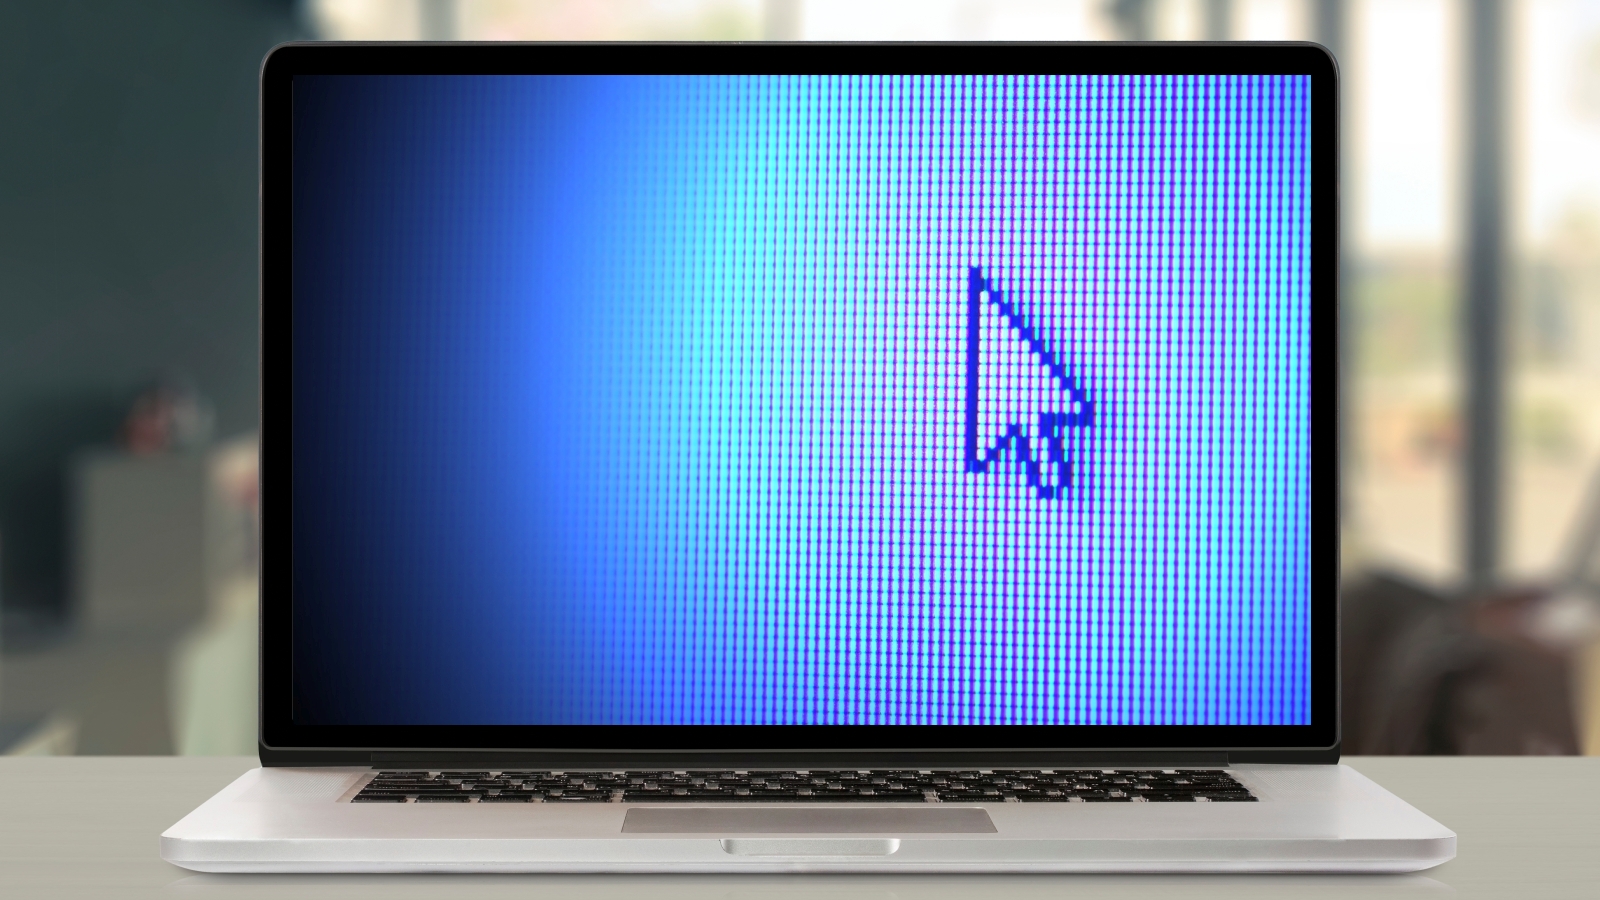 how to change mouse cursor windows 10